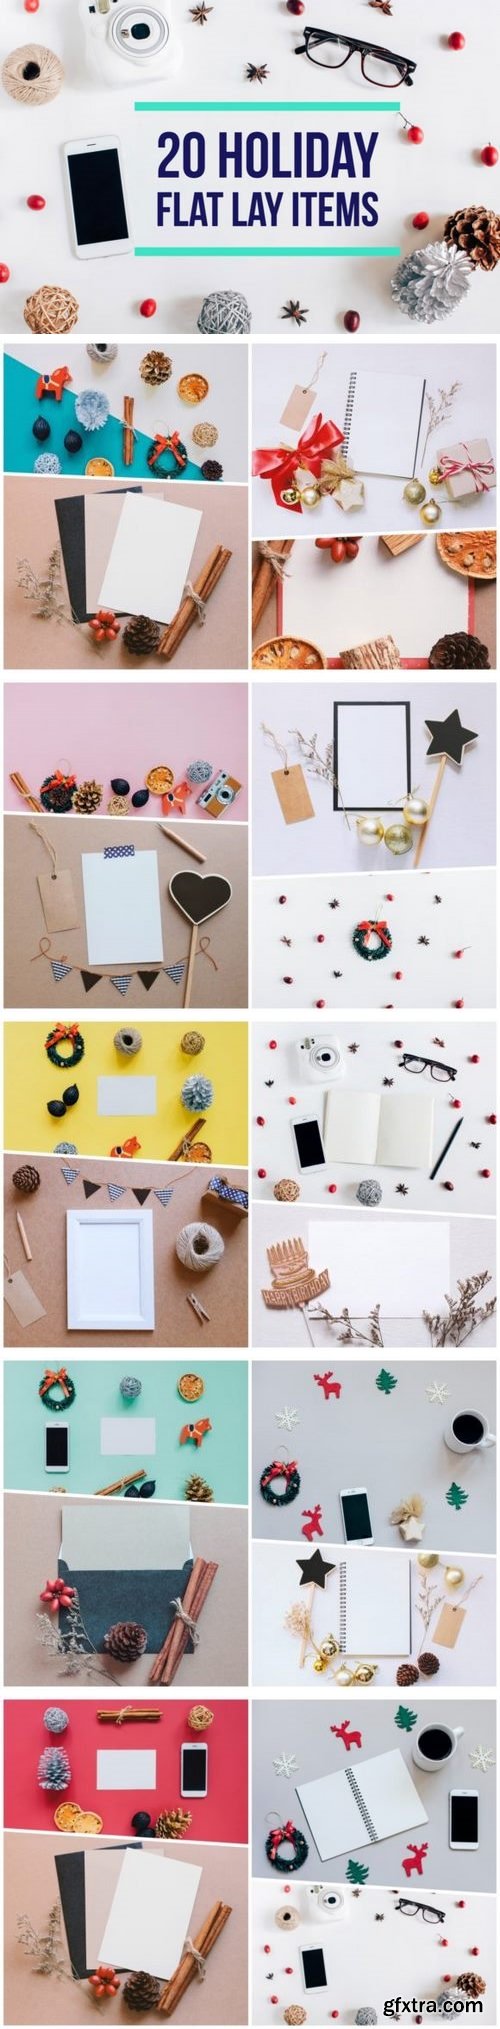 CM - 20 Holiday flat lay items collection 1064149